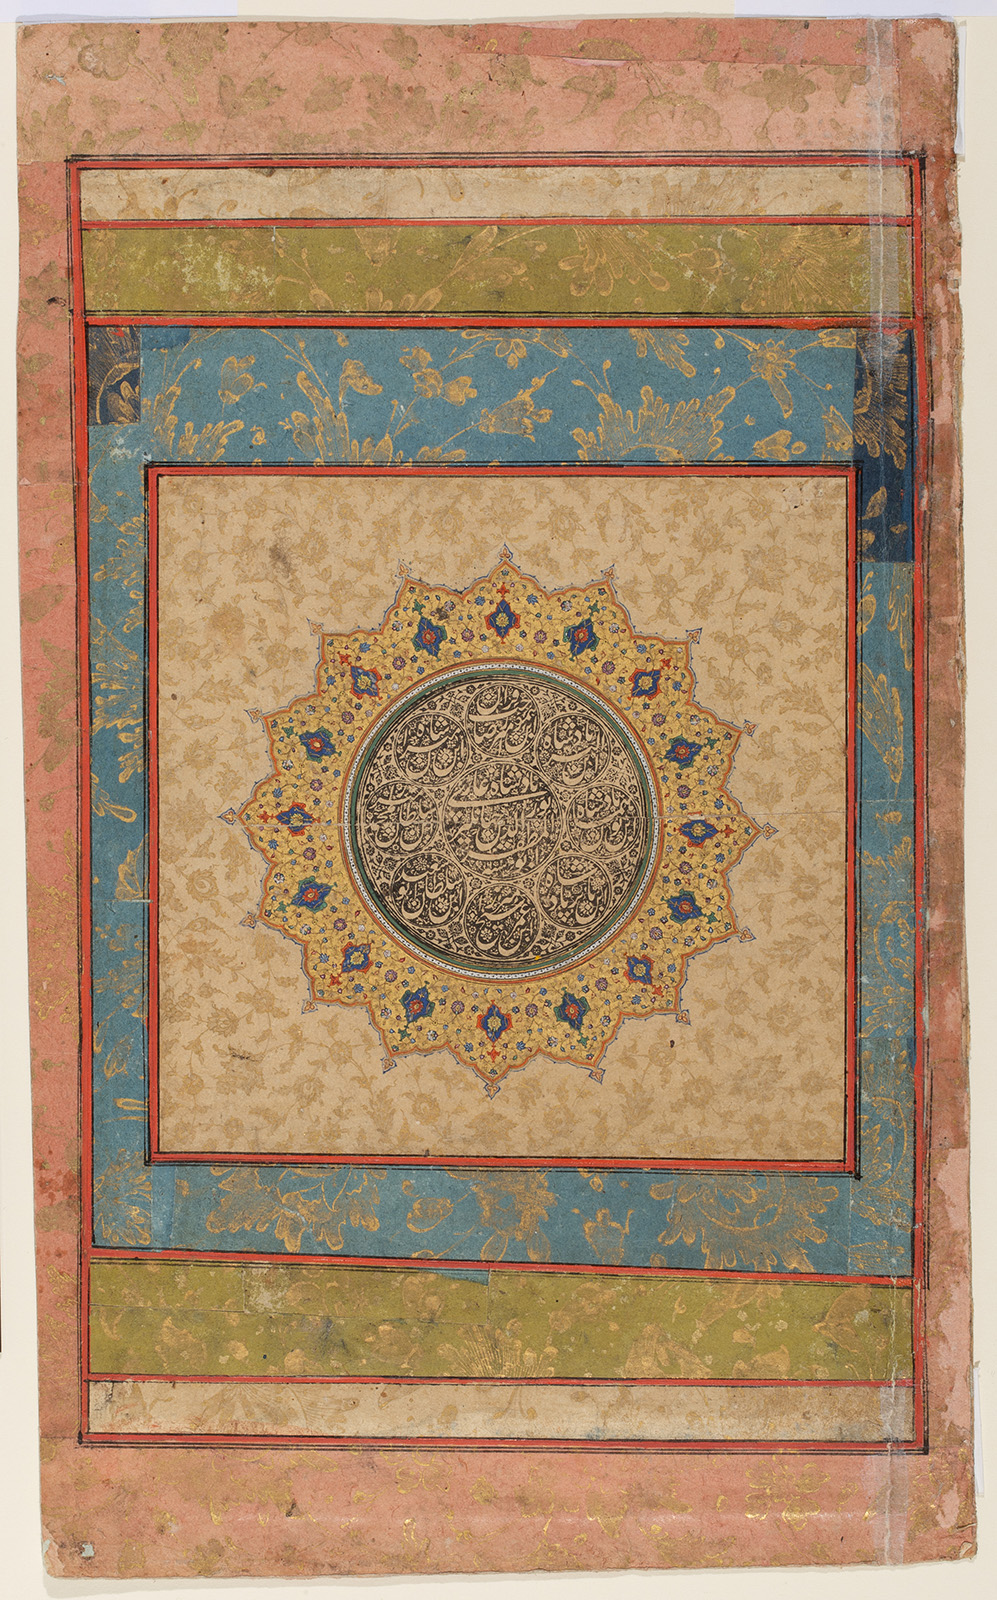 A decorative seal with Indian calligraphy and multiple colorful borders